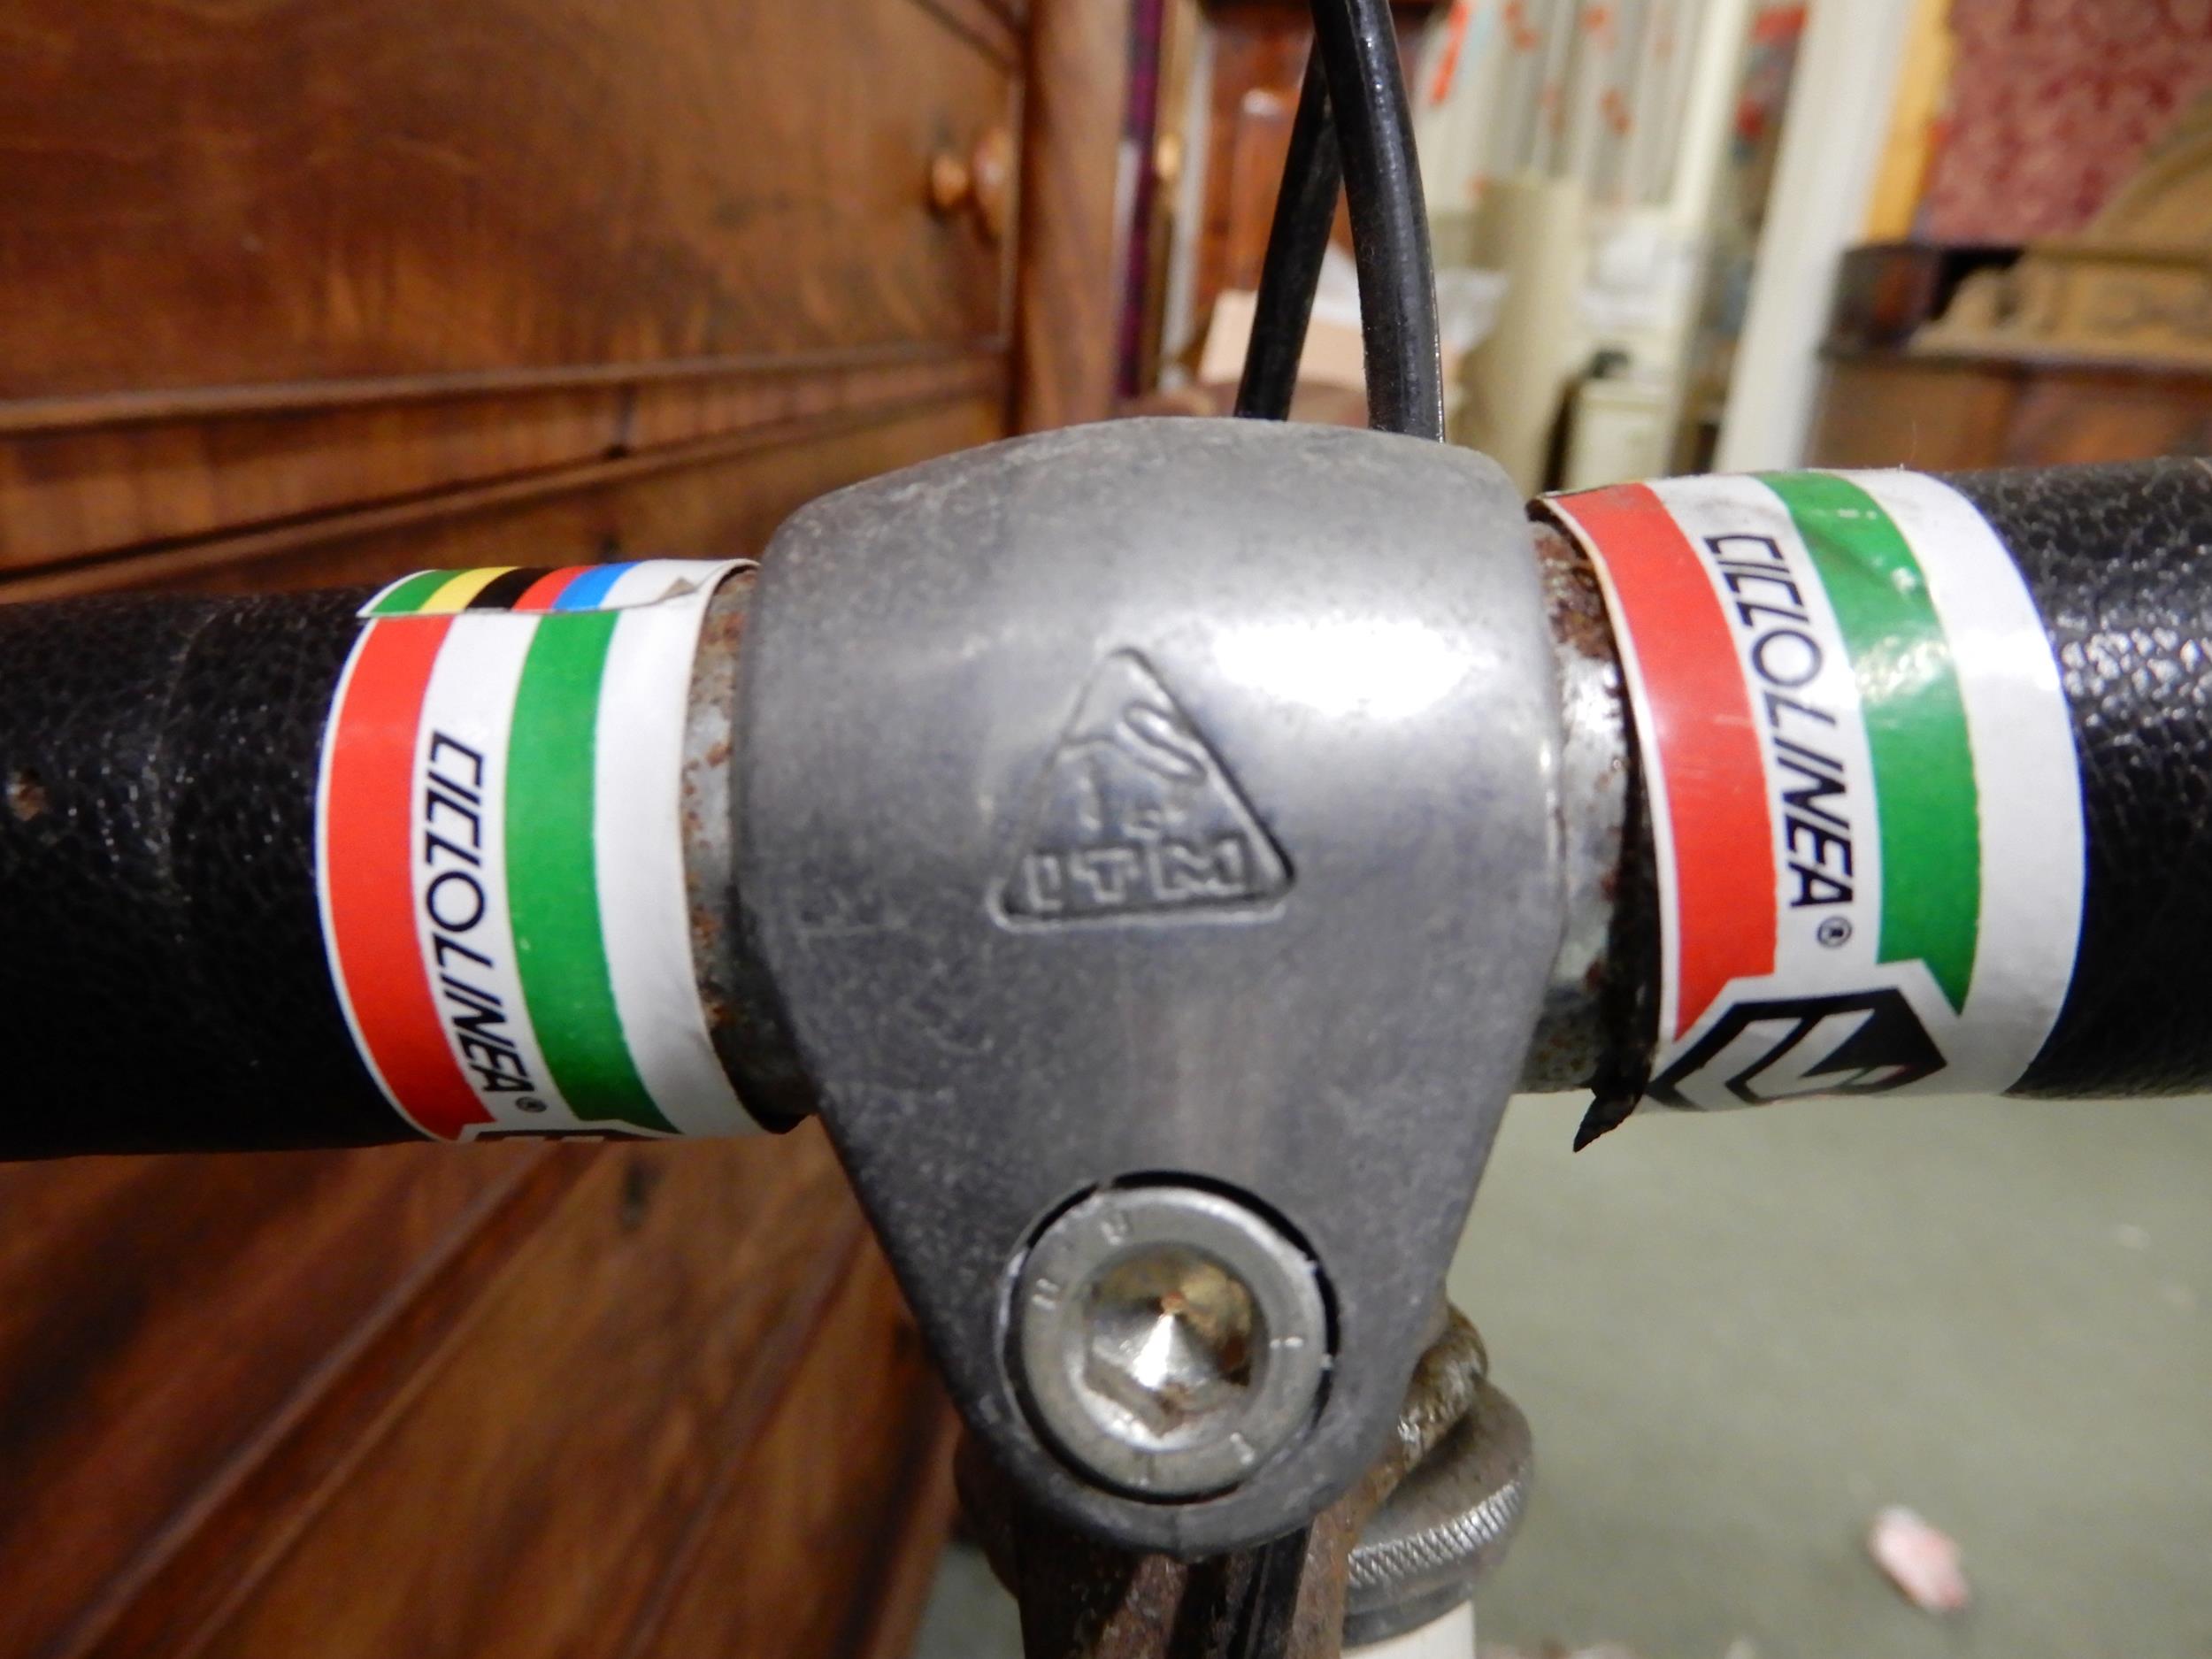 A mid 20th century Cinelli Milano racing bicycle with weinmann brakes and Unica saddle, 24 inch - Image 4 of 7